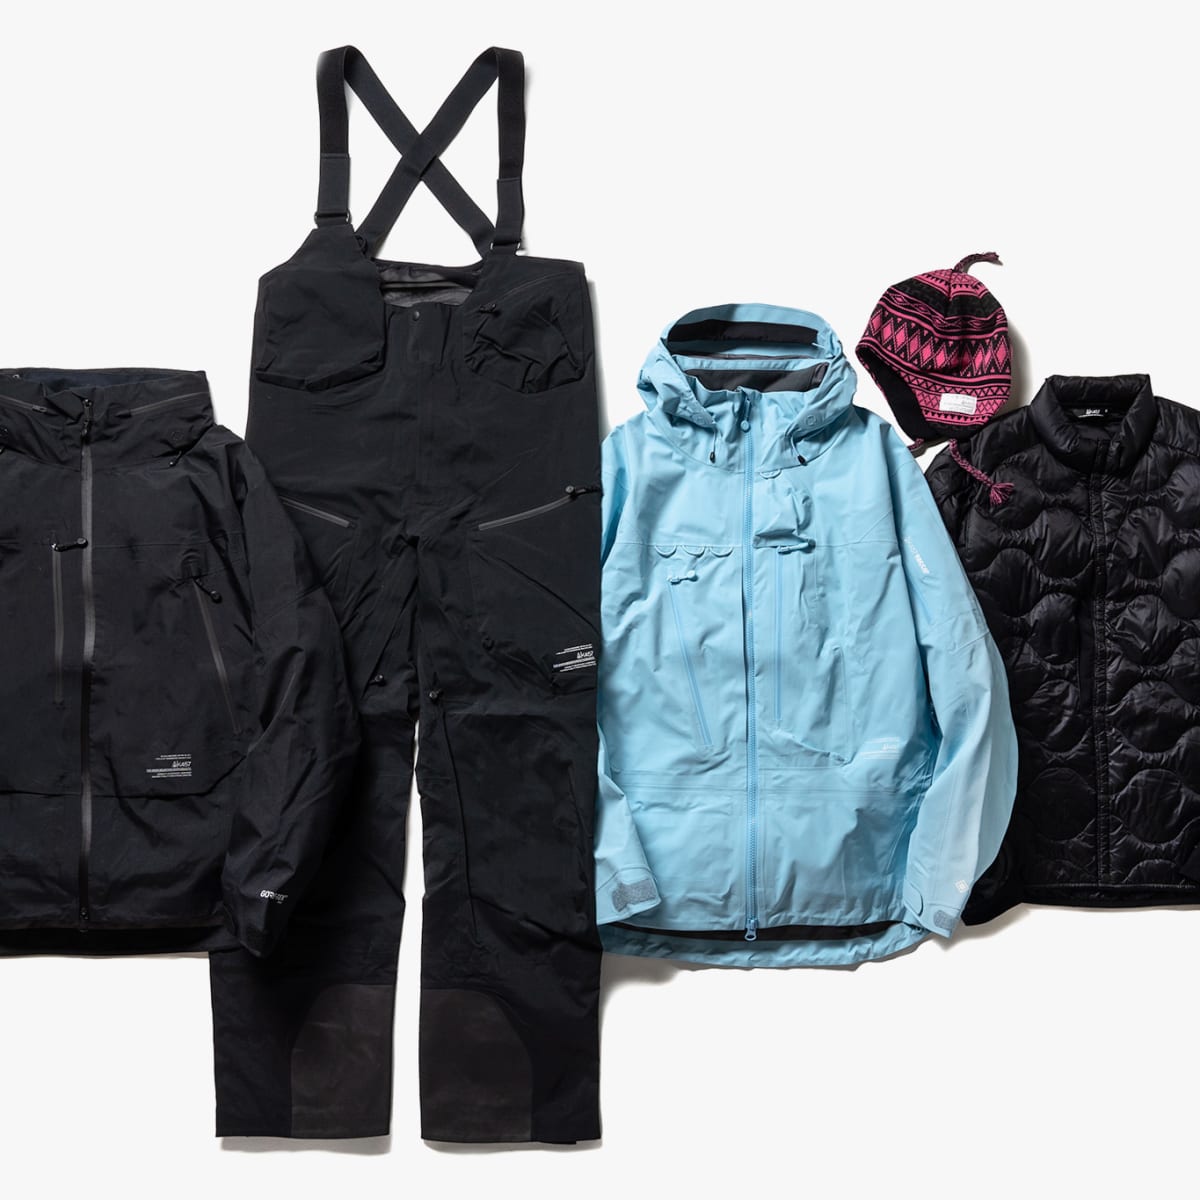 Burton Japan outfits their new AK457 collection with Gore-Tex Pro 